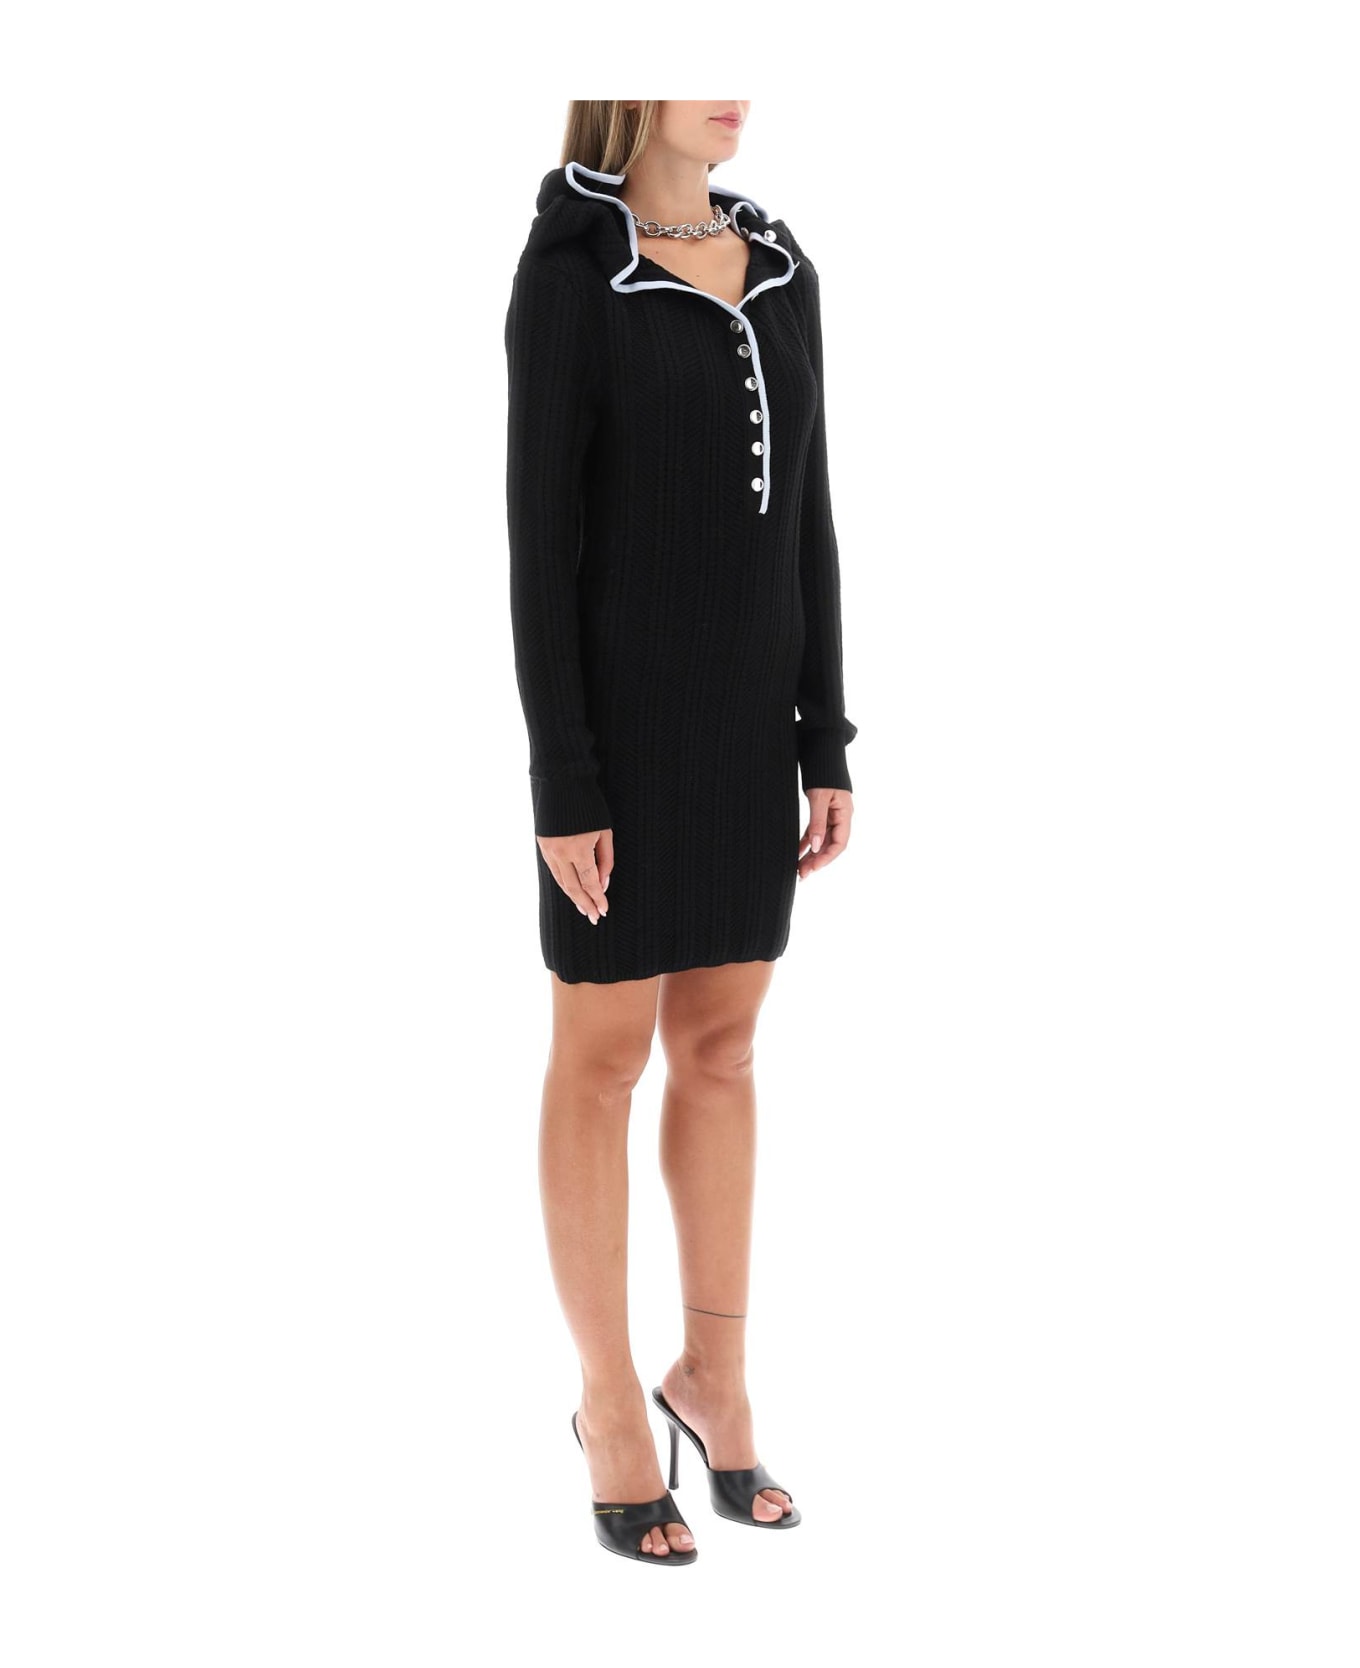 Y/Project Merino Wool Dress With Necklace - EVERGREEN BLACK (Black) ニットウェア